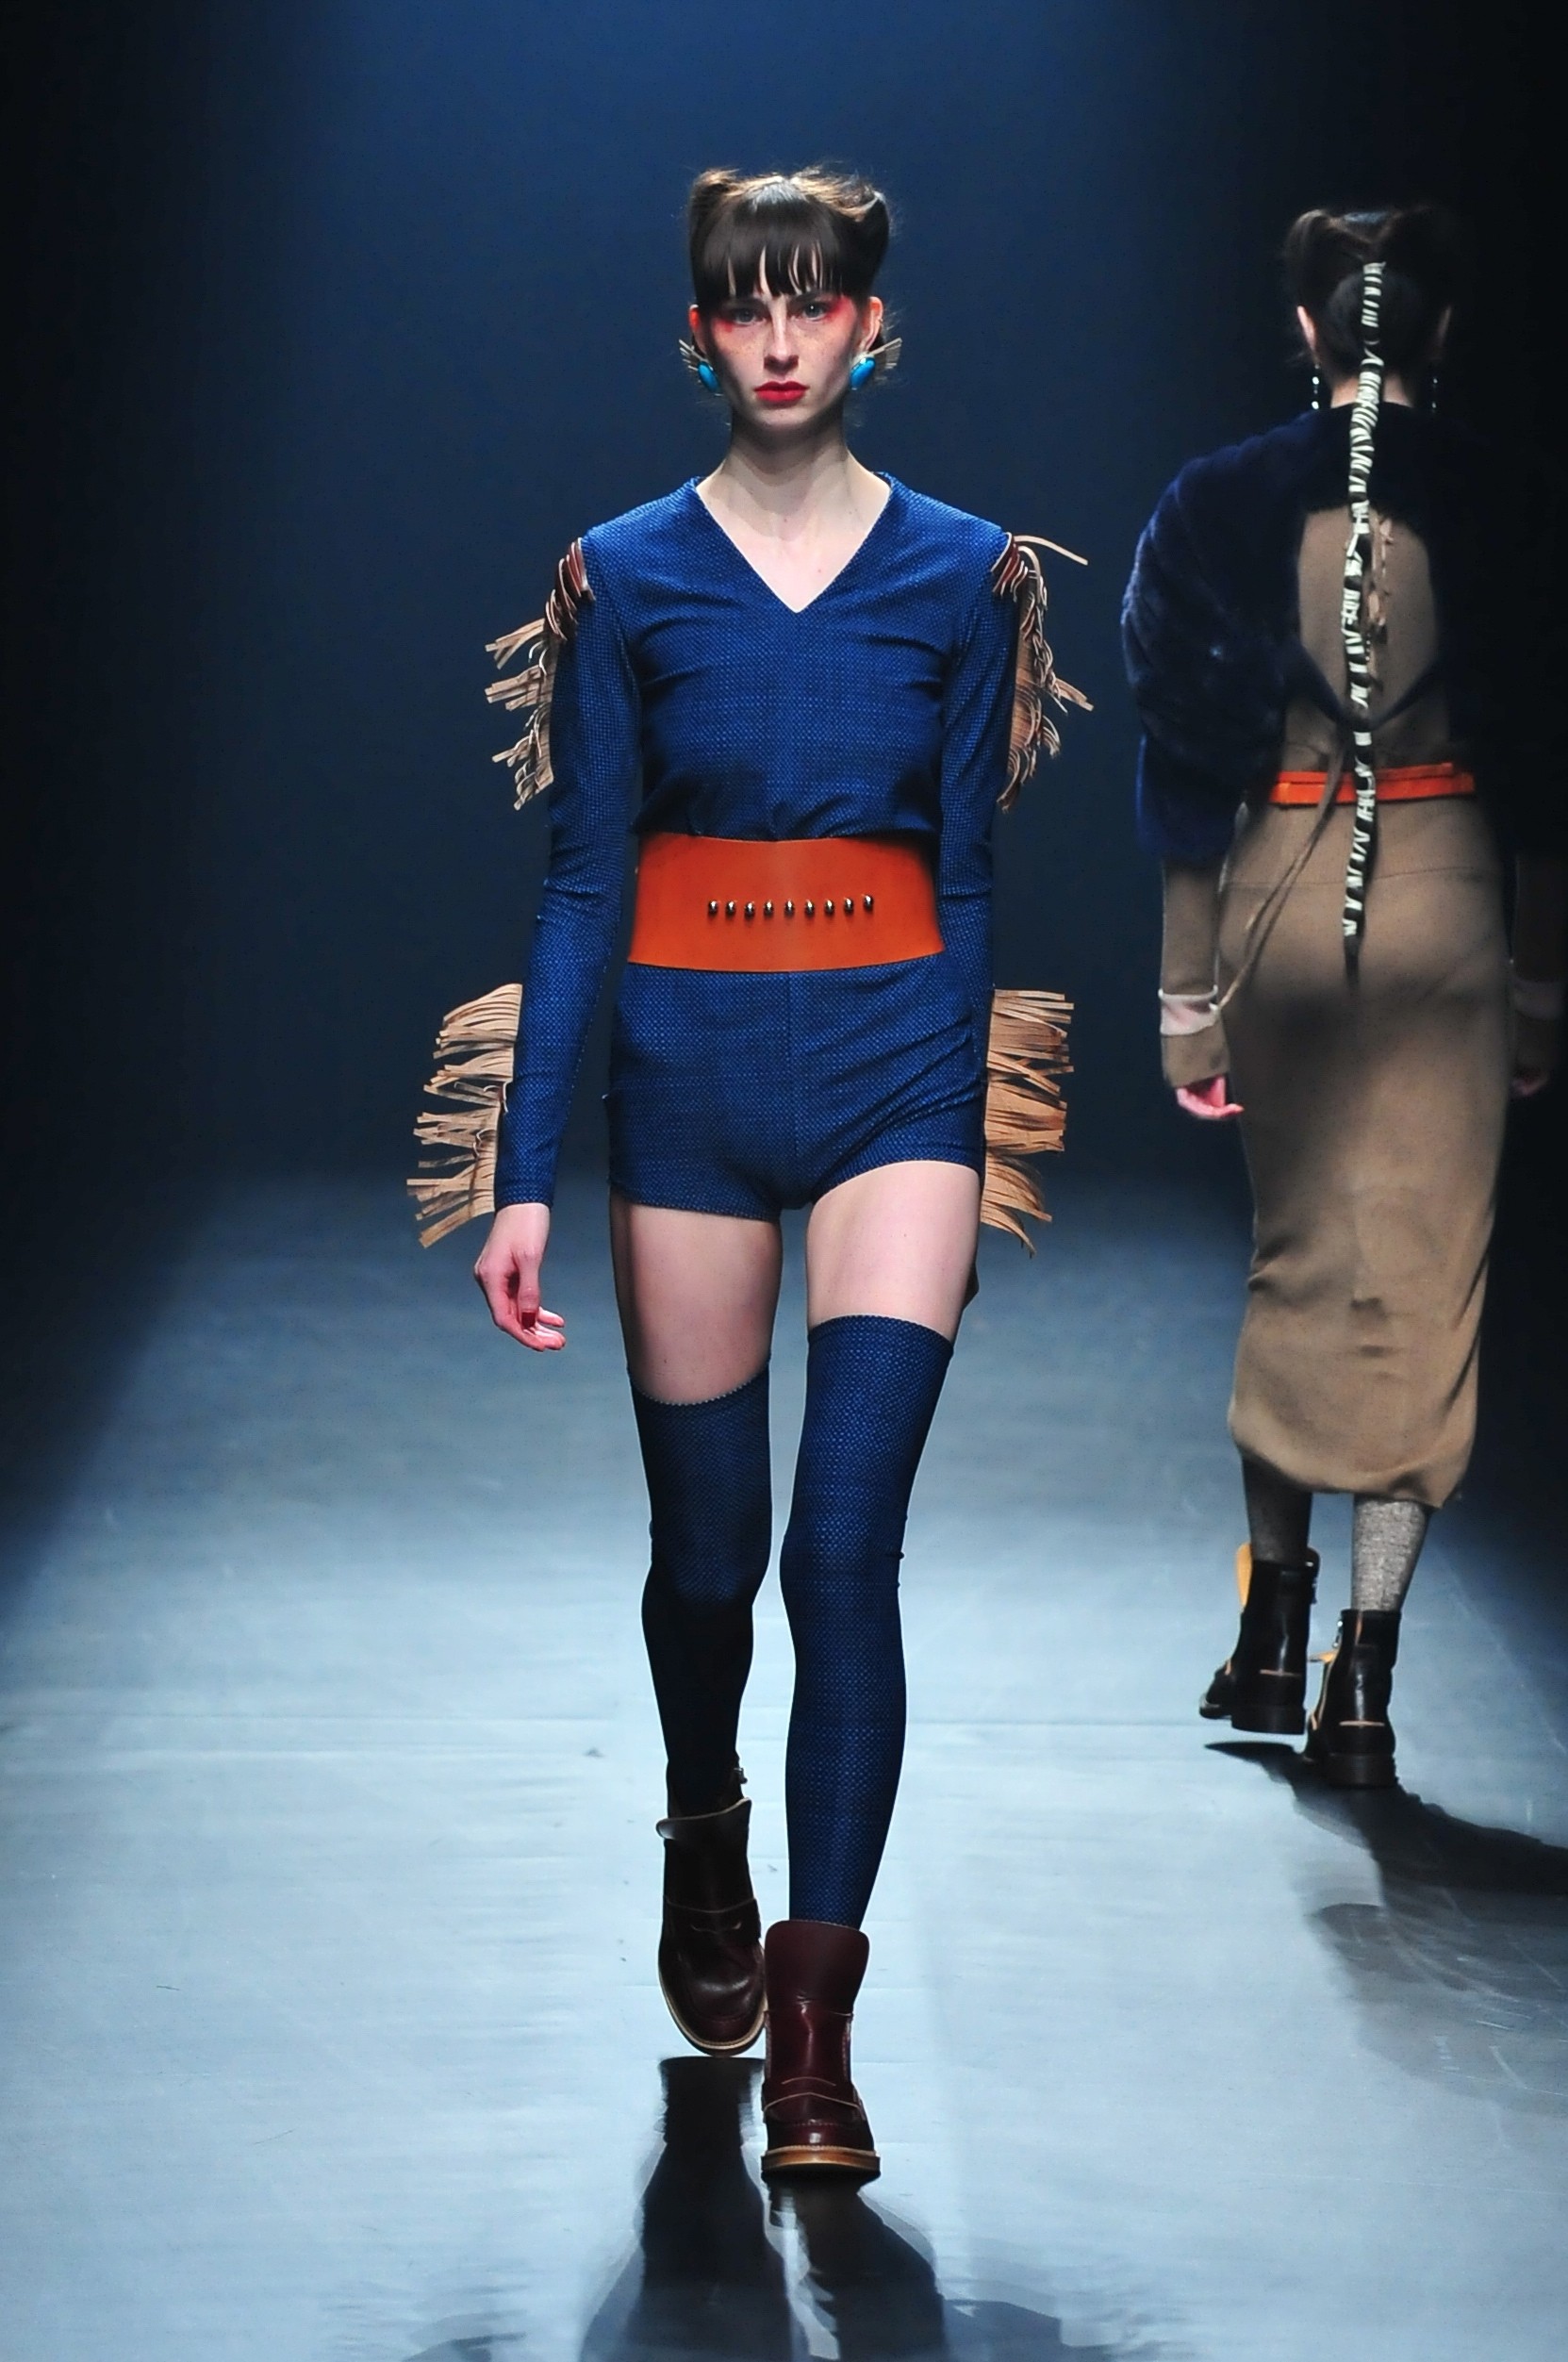 One of the highlights at Tokyo Fashion Week was THE Dallas collection. Photo: ©Japan Fashion Week Organization